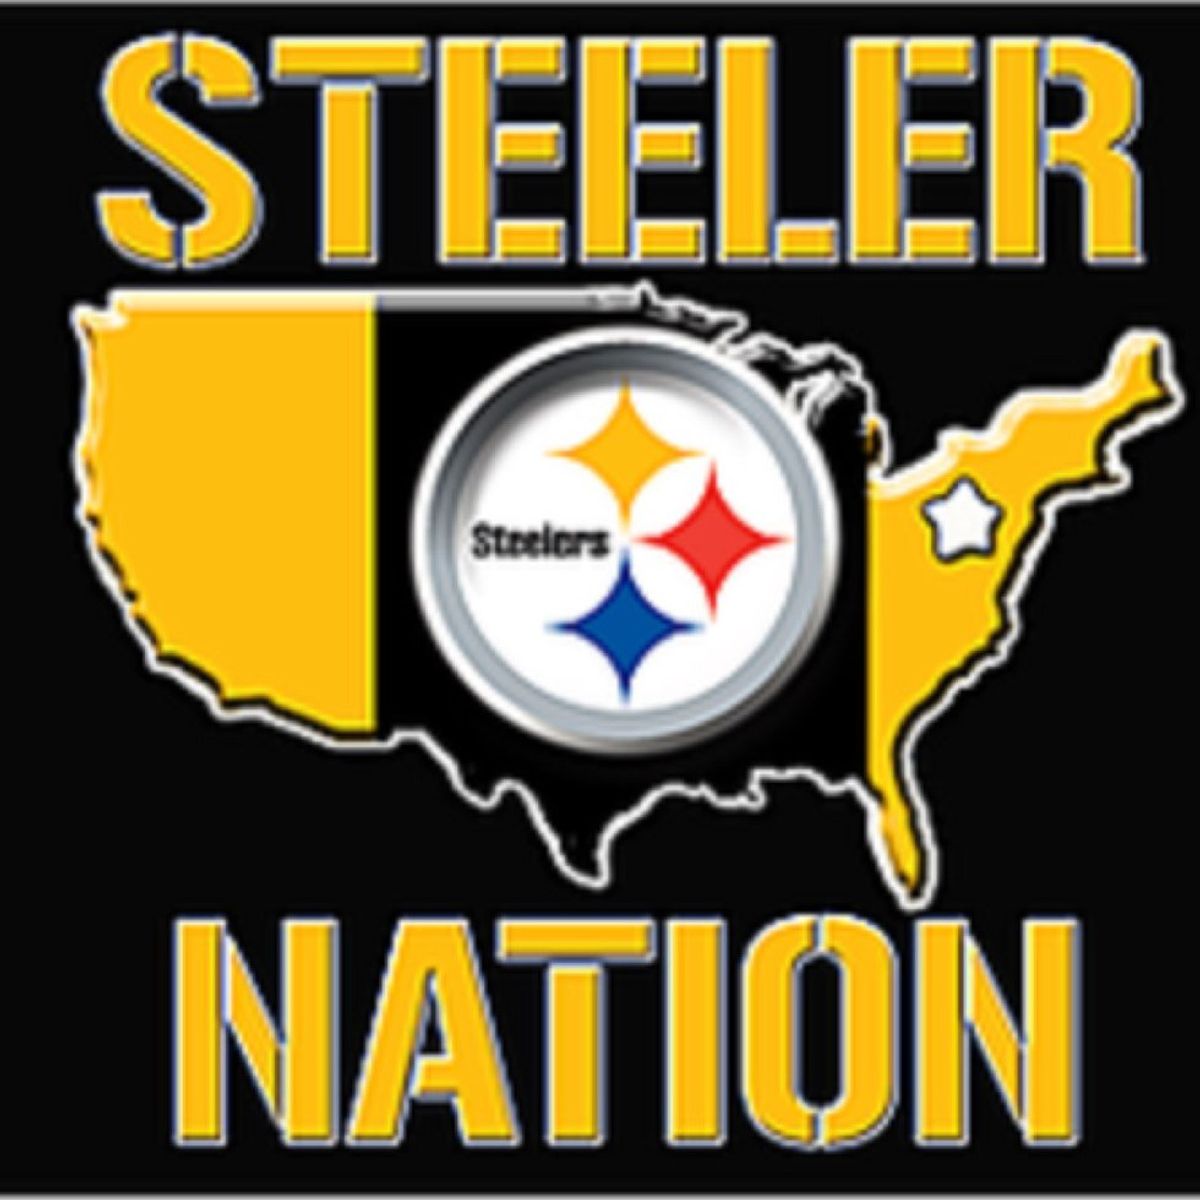 The Turbulence of Steeler Nation